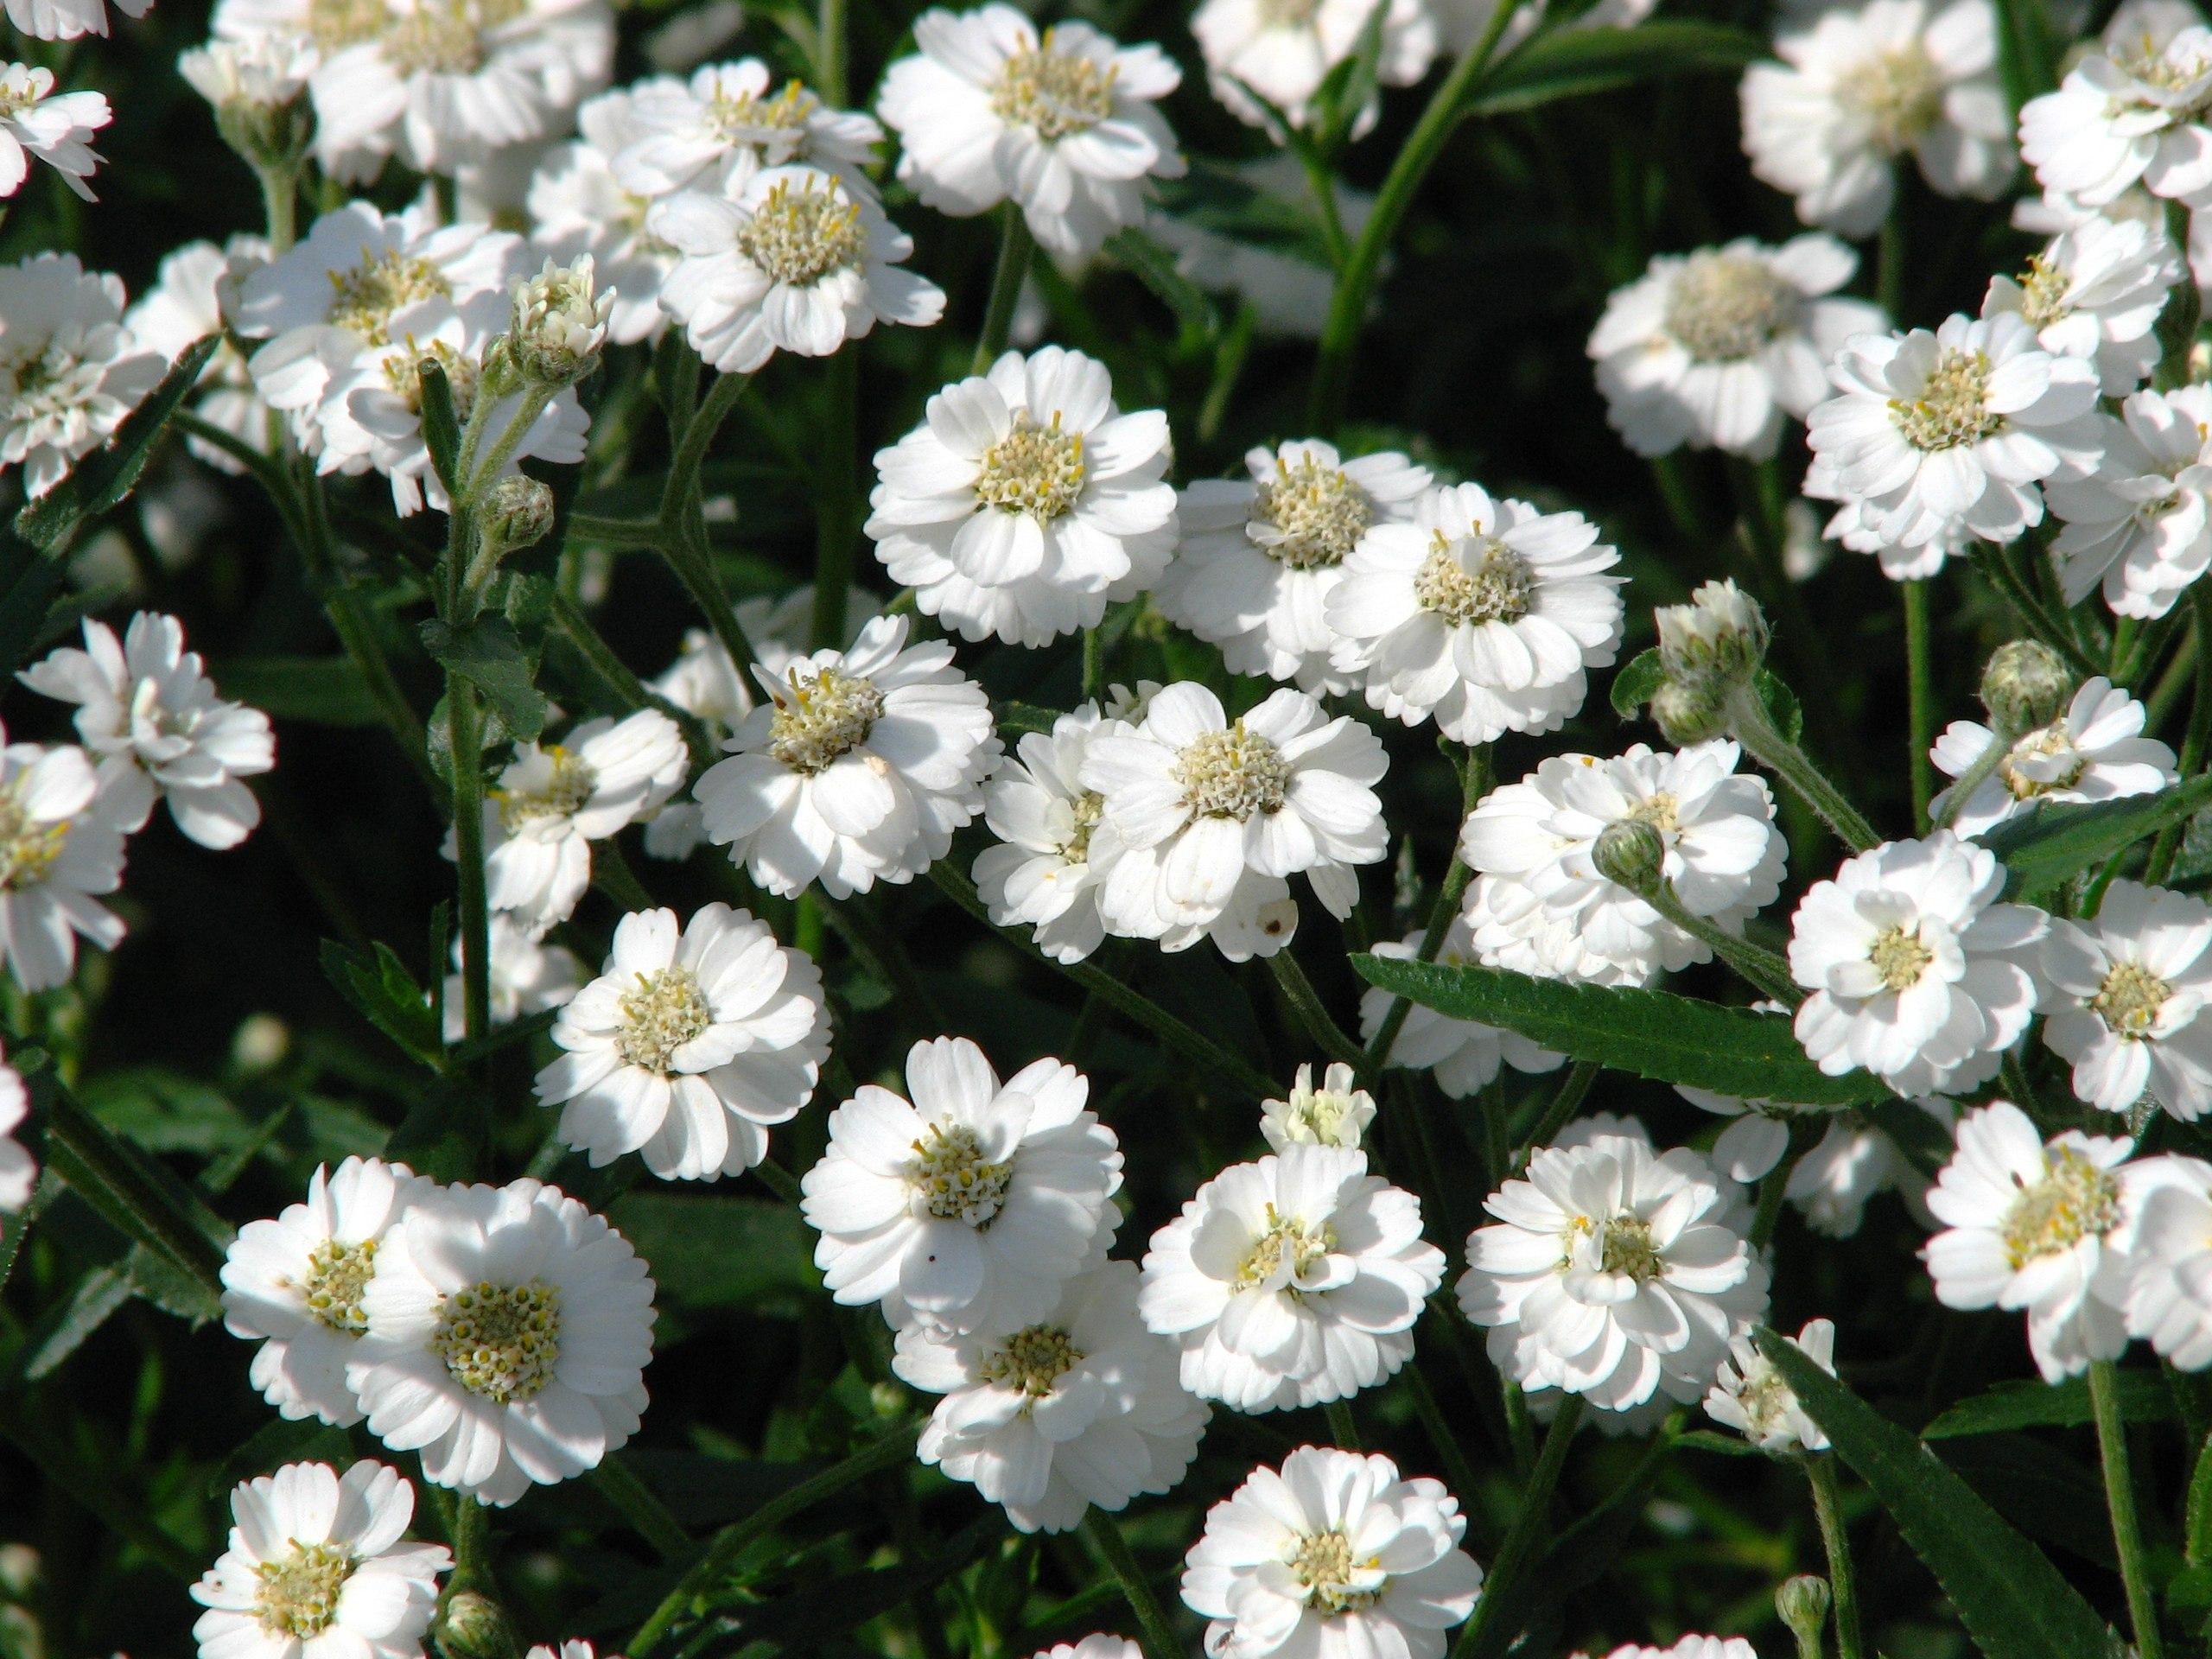 white flowers with beige-yellow center, dark-green leaves and stems